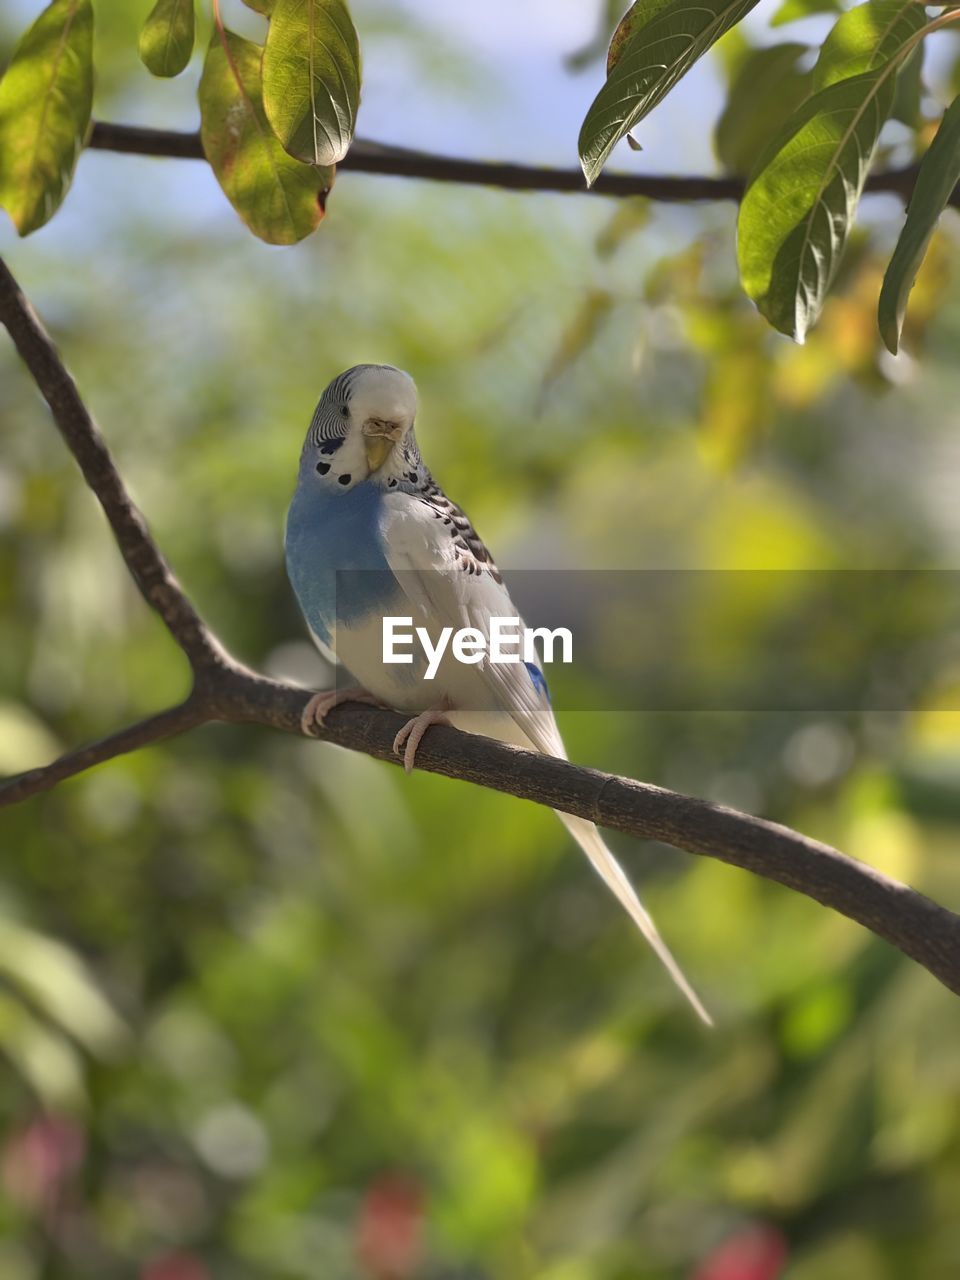 animal themes, bird, animal, animal wildlife, wildlife, tree, branch, one animal, perching, plant, nature, beak, parakeet, no people, outdoors, focus on foreground, beauty in nature, full length, leaf, day, plant part